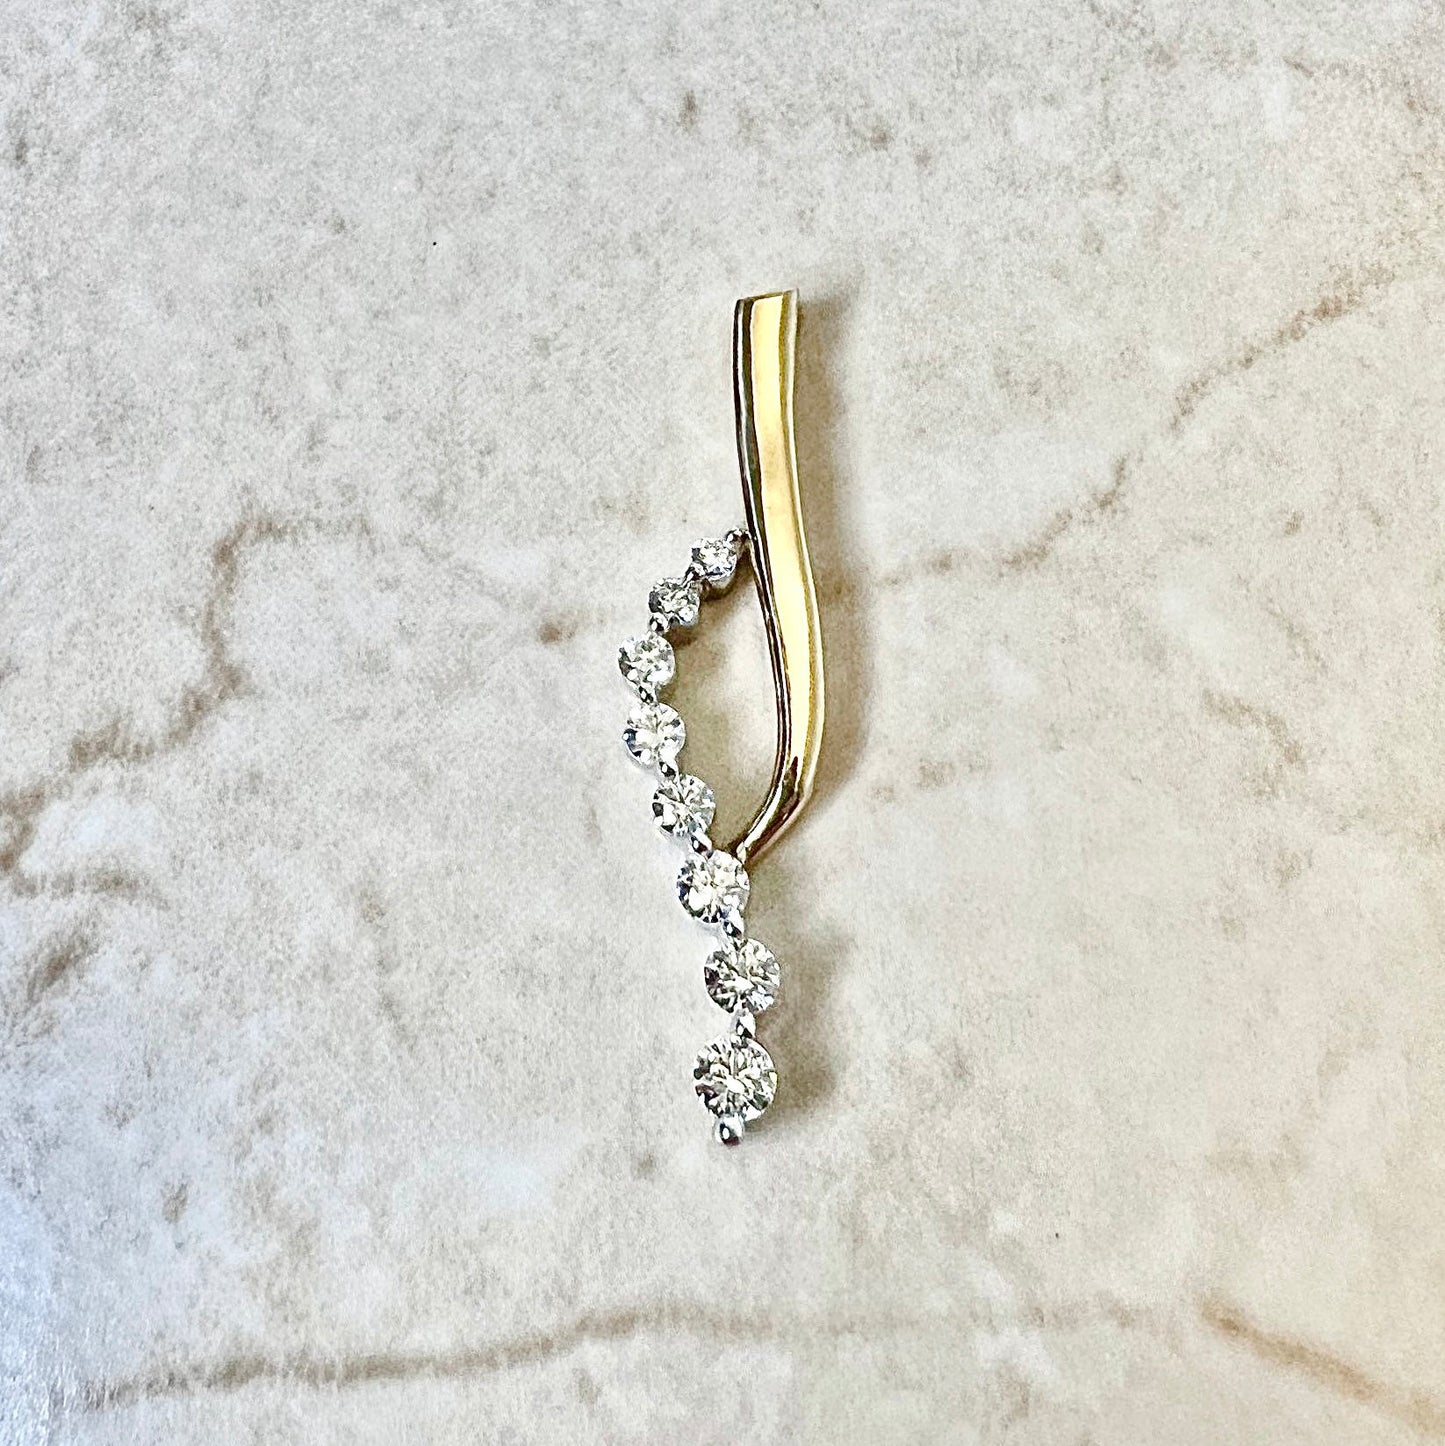 14K Graduated Diamond Pendant Necklace - Two Tone Gold Diamond Necklace - Birthday Gift - Best Gift For Her - Jewelry Sale -April Birthstone